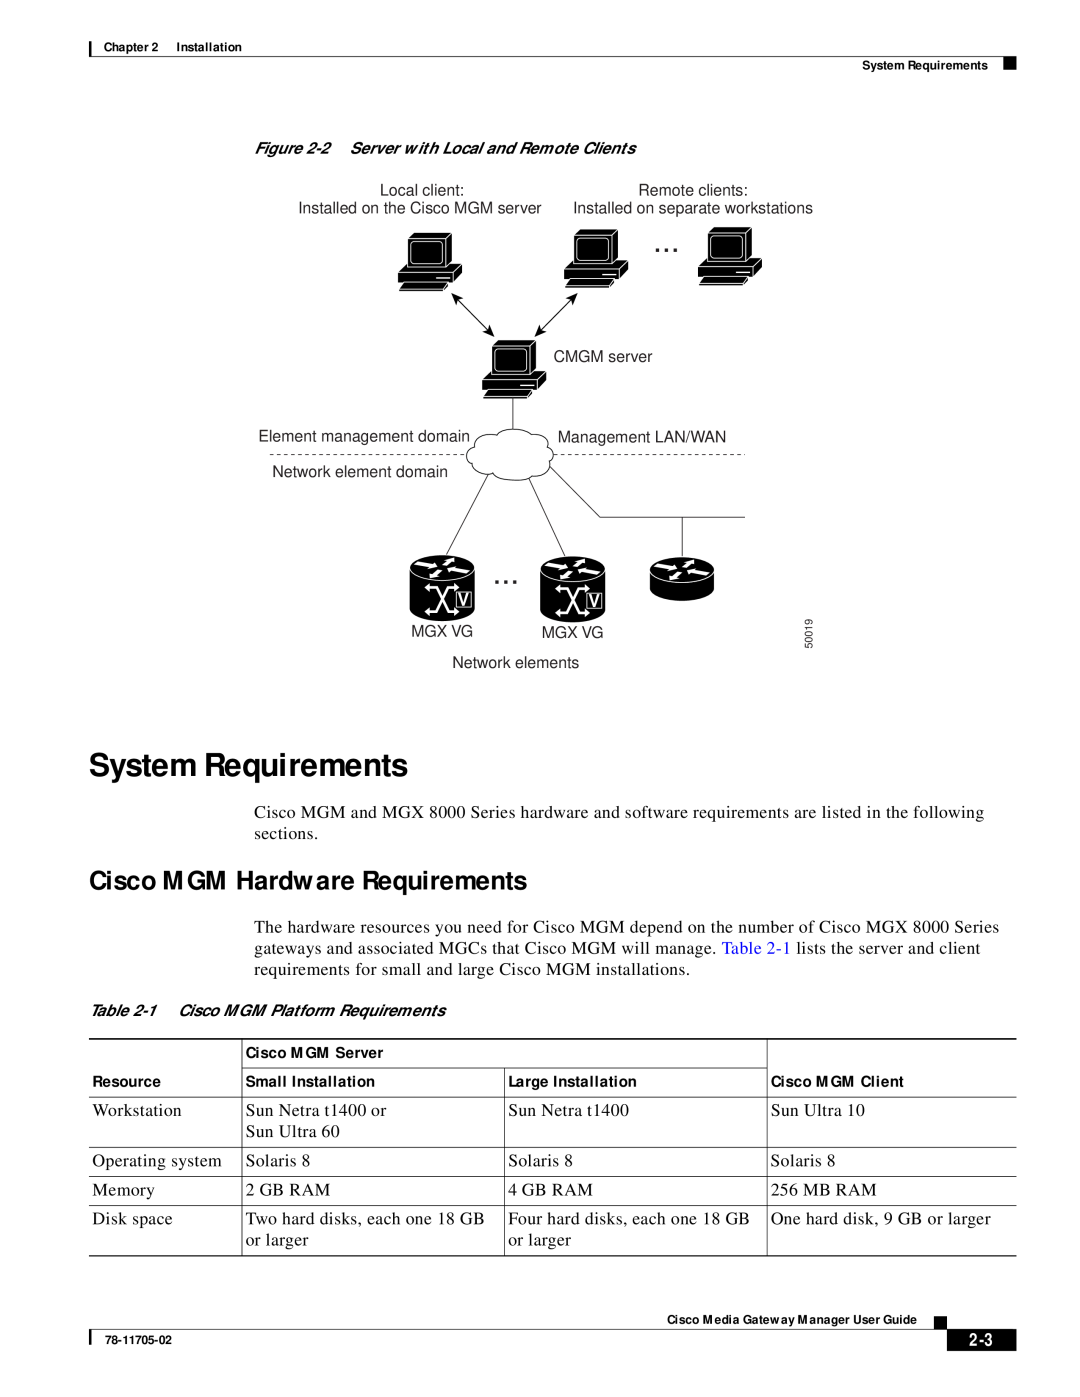 Cisco Systems MGX 8000 System Requirements, Cisco MGM Hardware Requirements, Cisco MGM Server, Resource, Cisco MGM Client 